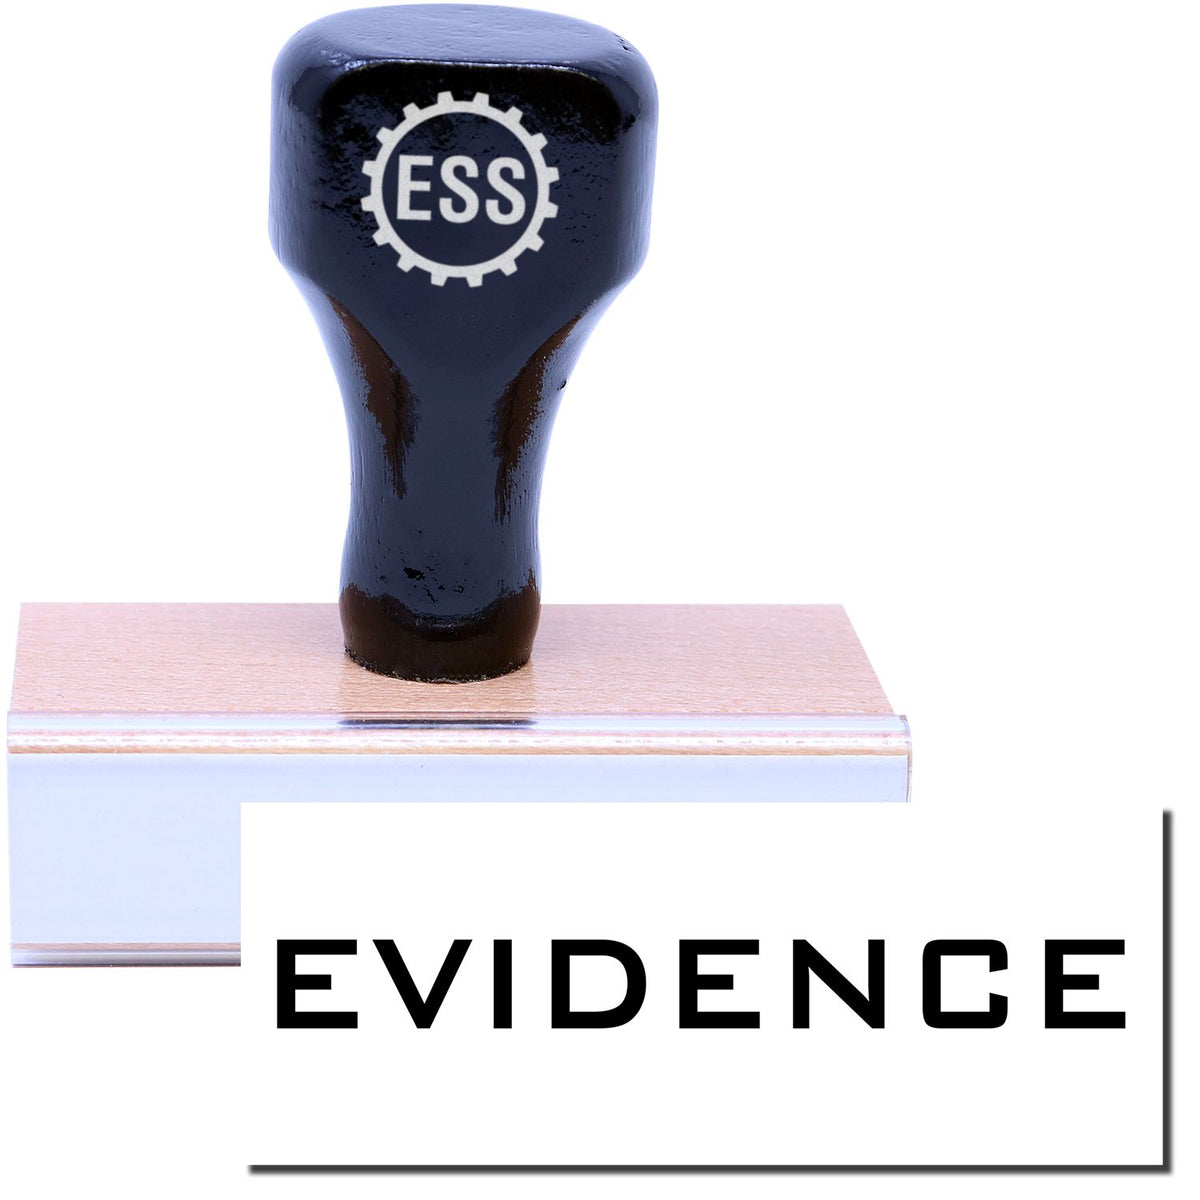 A stock office rubber stamp with a stamped image showing how the text &quot;EVIDENCE&quot; is displayed after stamping.